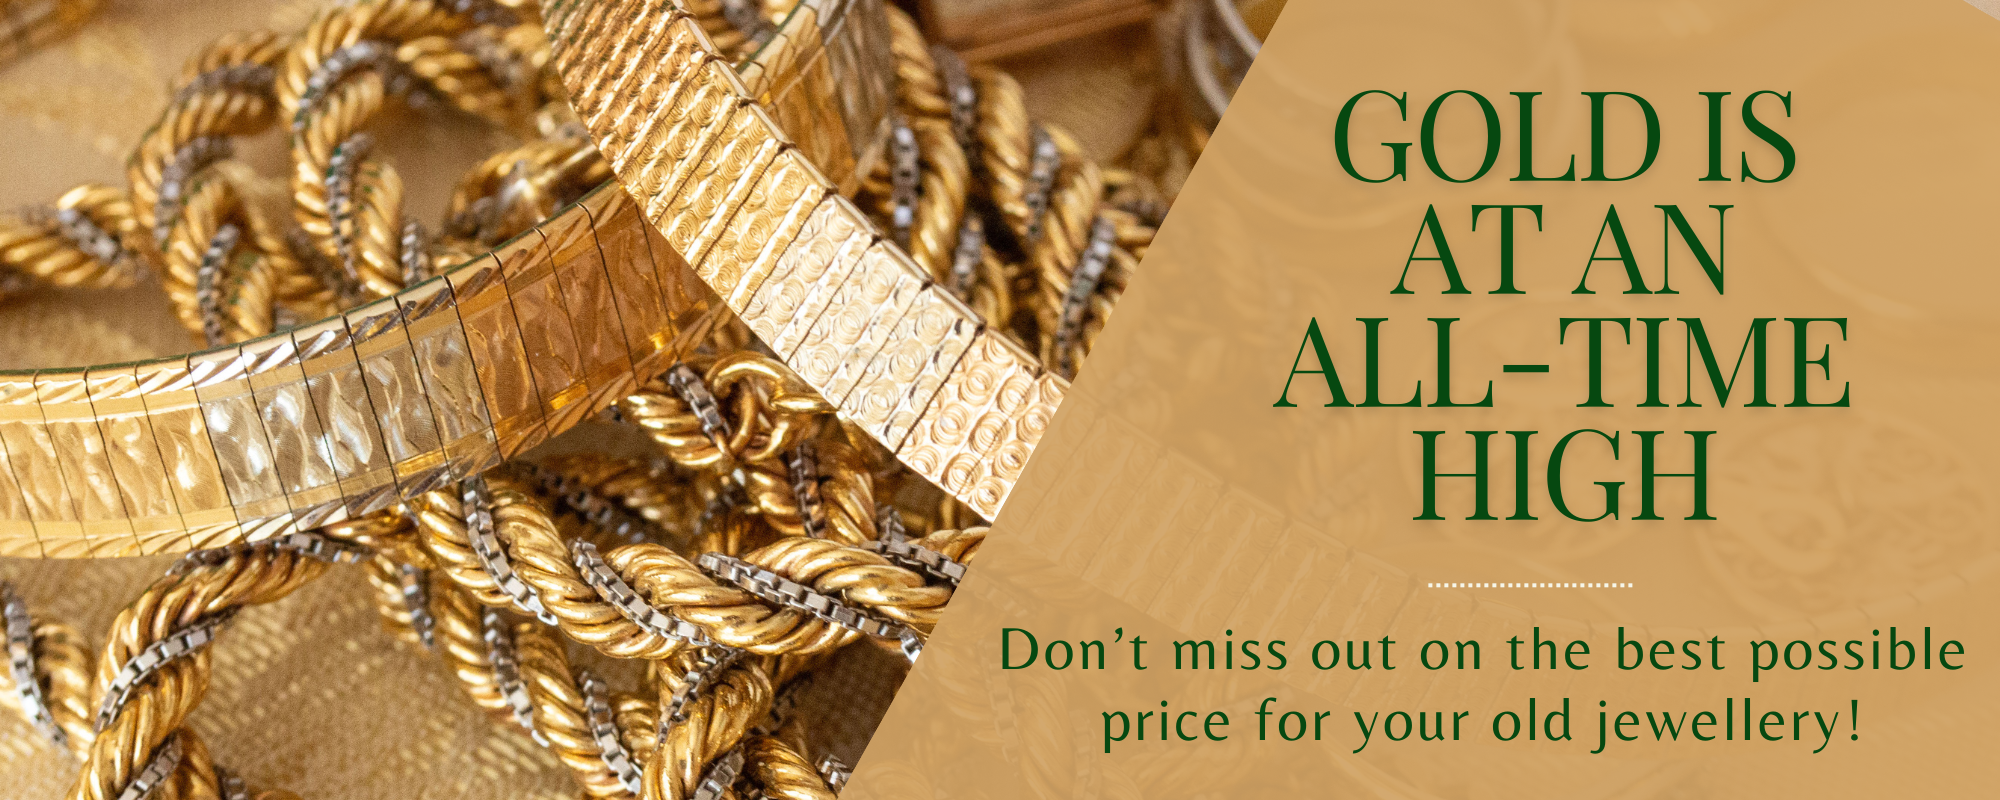 Take advantage of gold being an all-time high and sell your scrap gold for the highest price! (3)